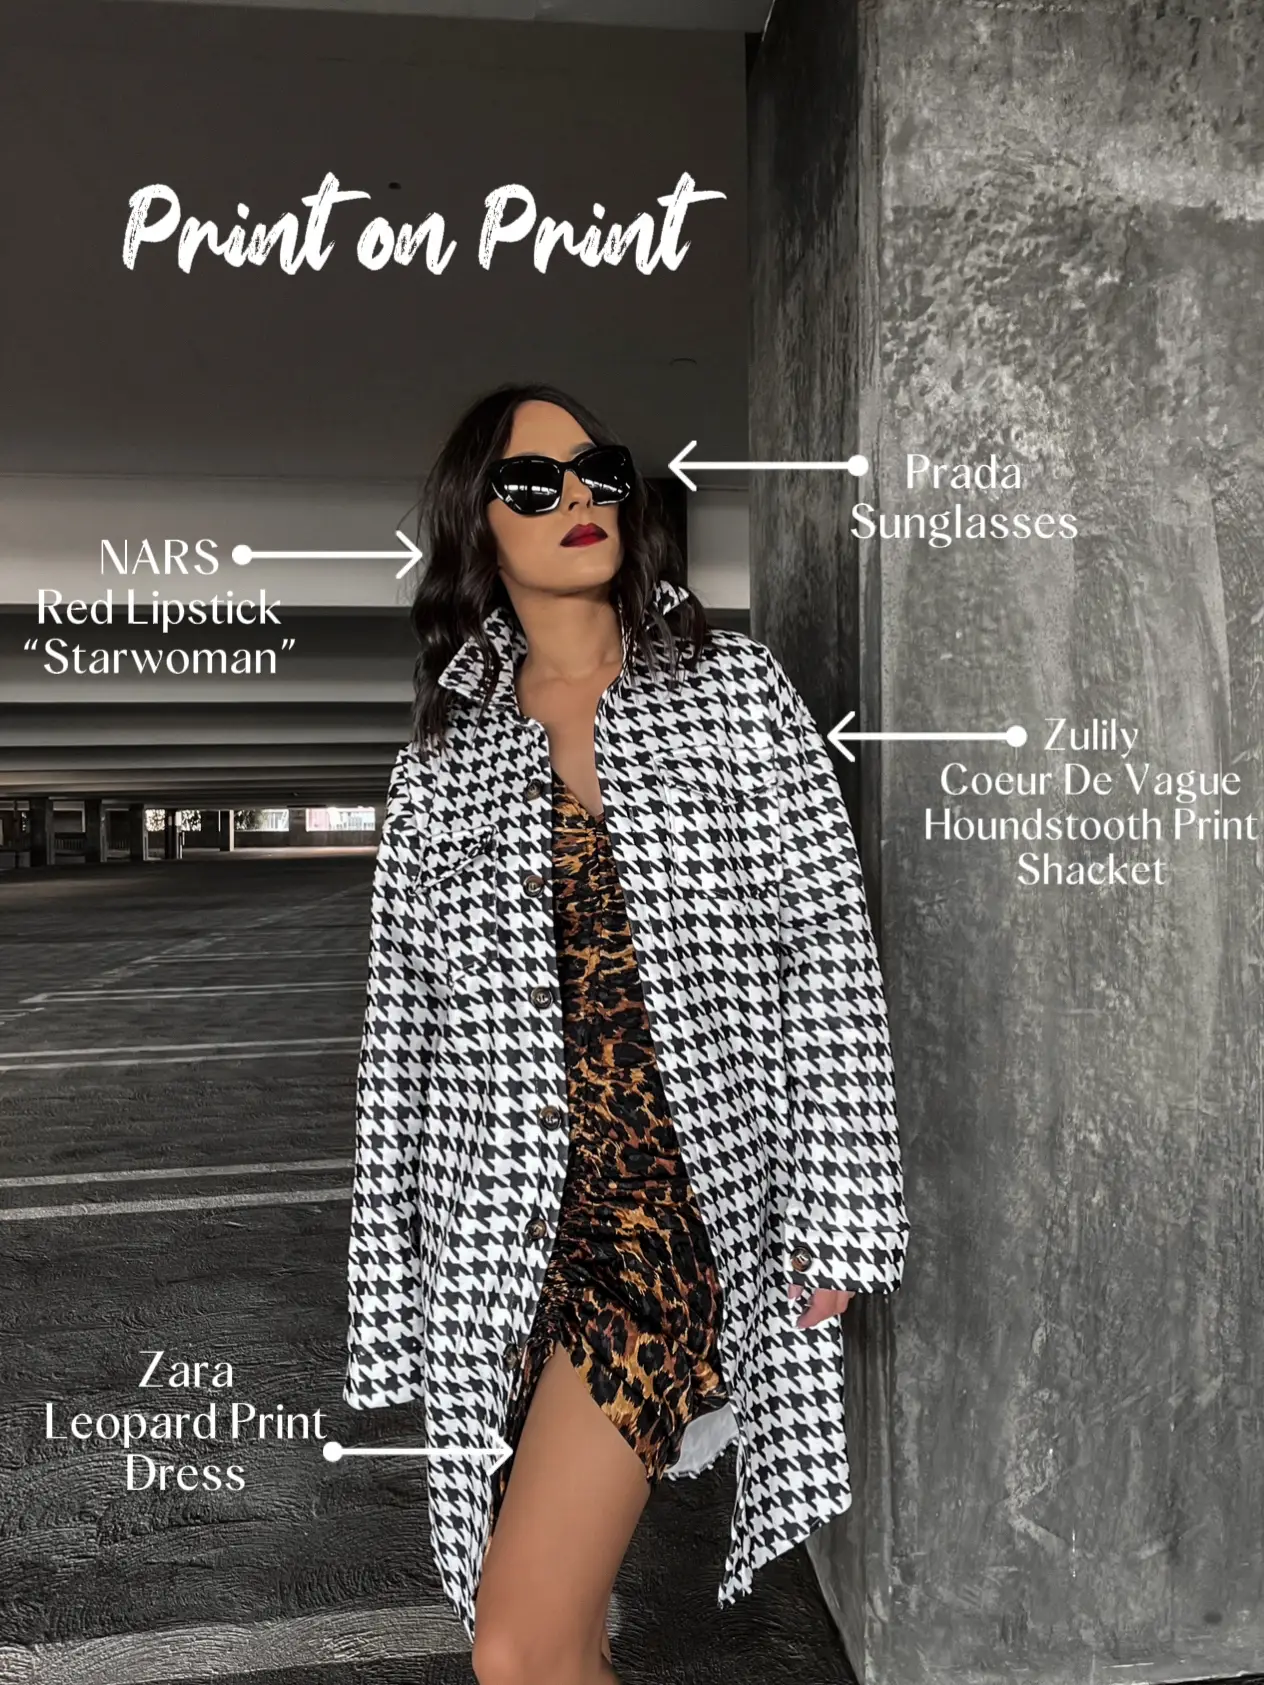 33 New Ways How To Wear Houndstooth Print For Women 2020